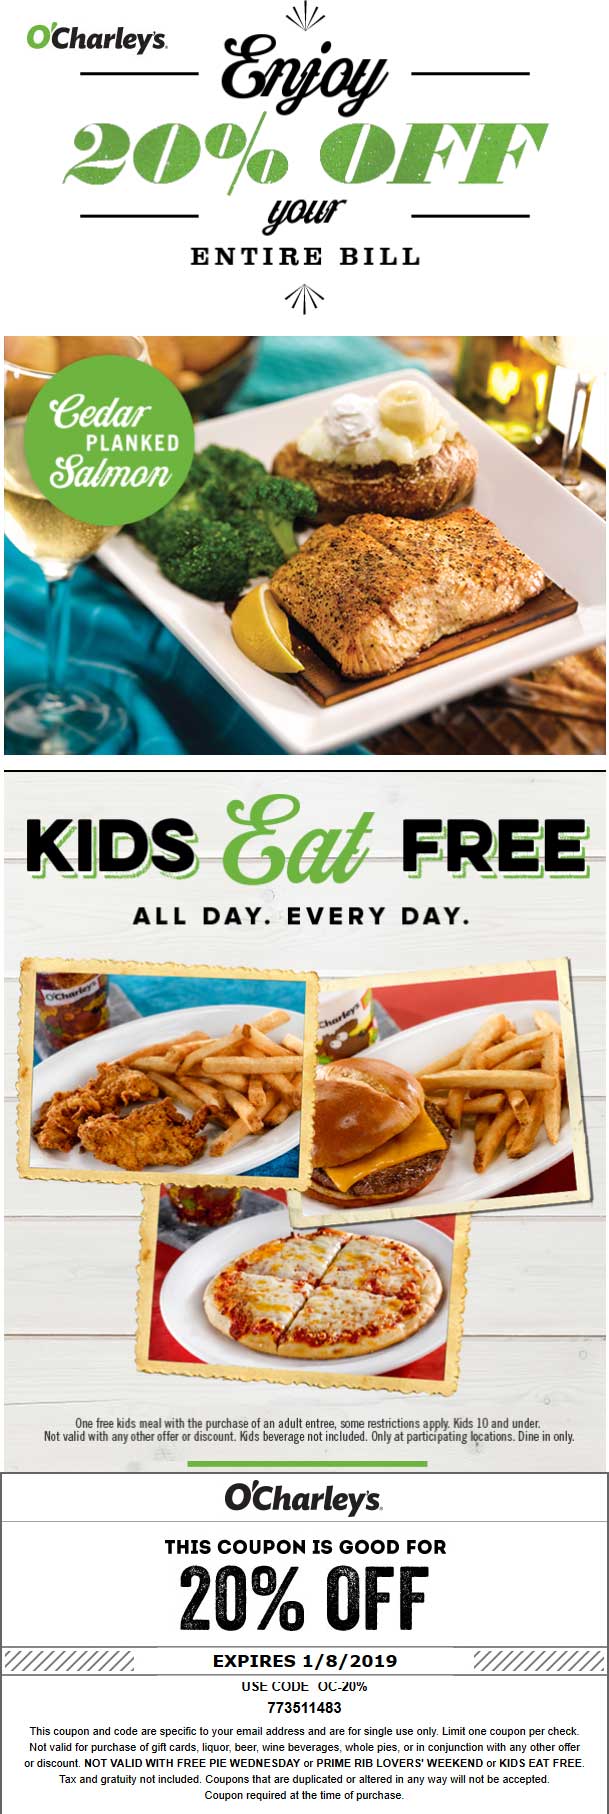 ocharleys-coupons-kids-eat-free-with-your-entree-at-ocharleys